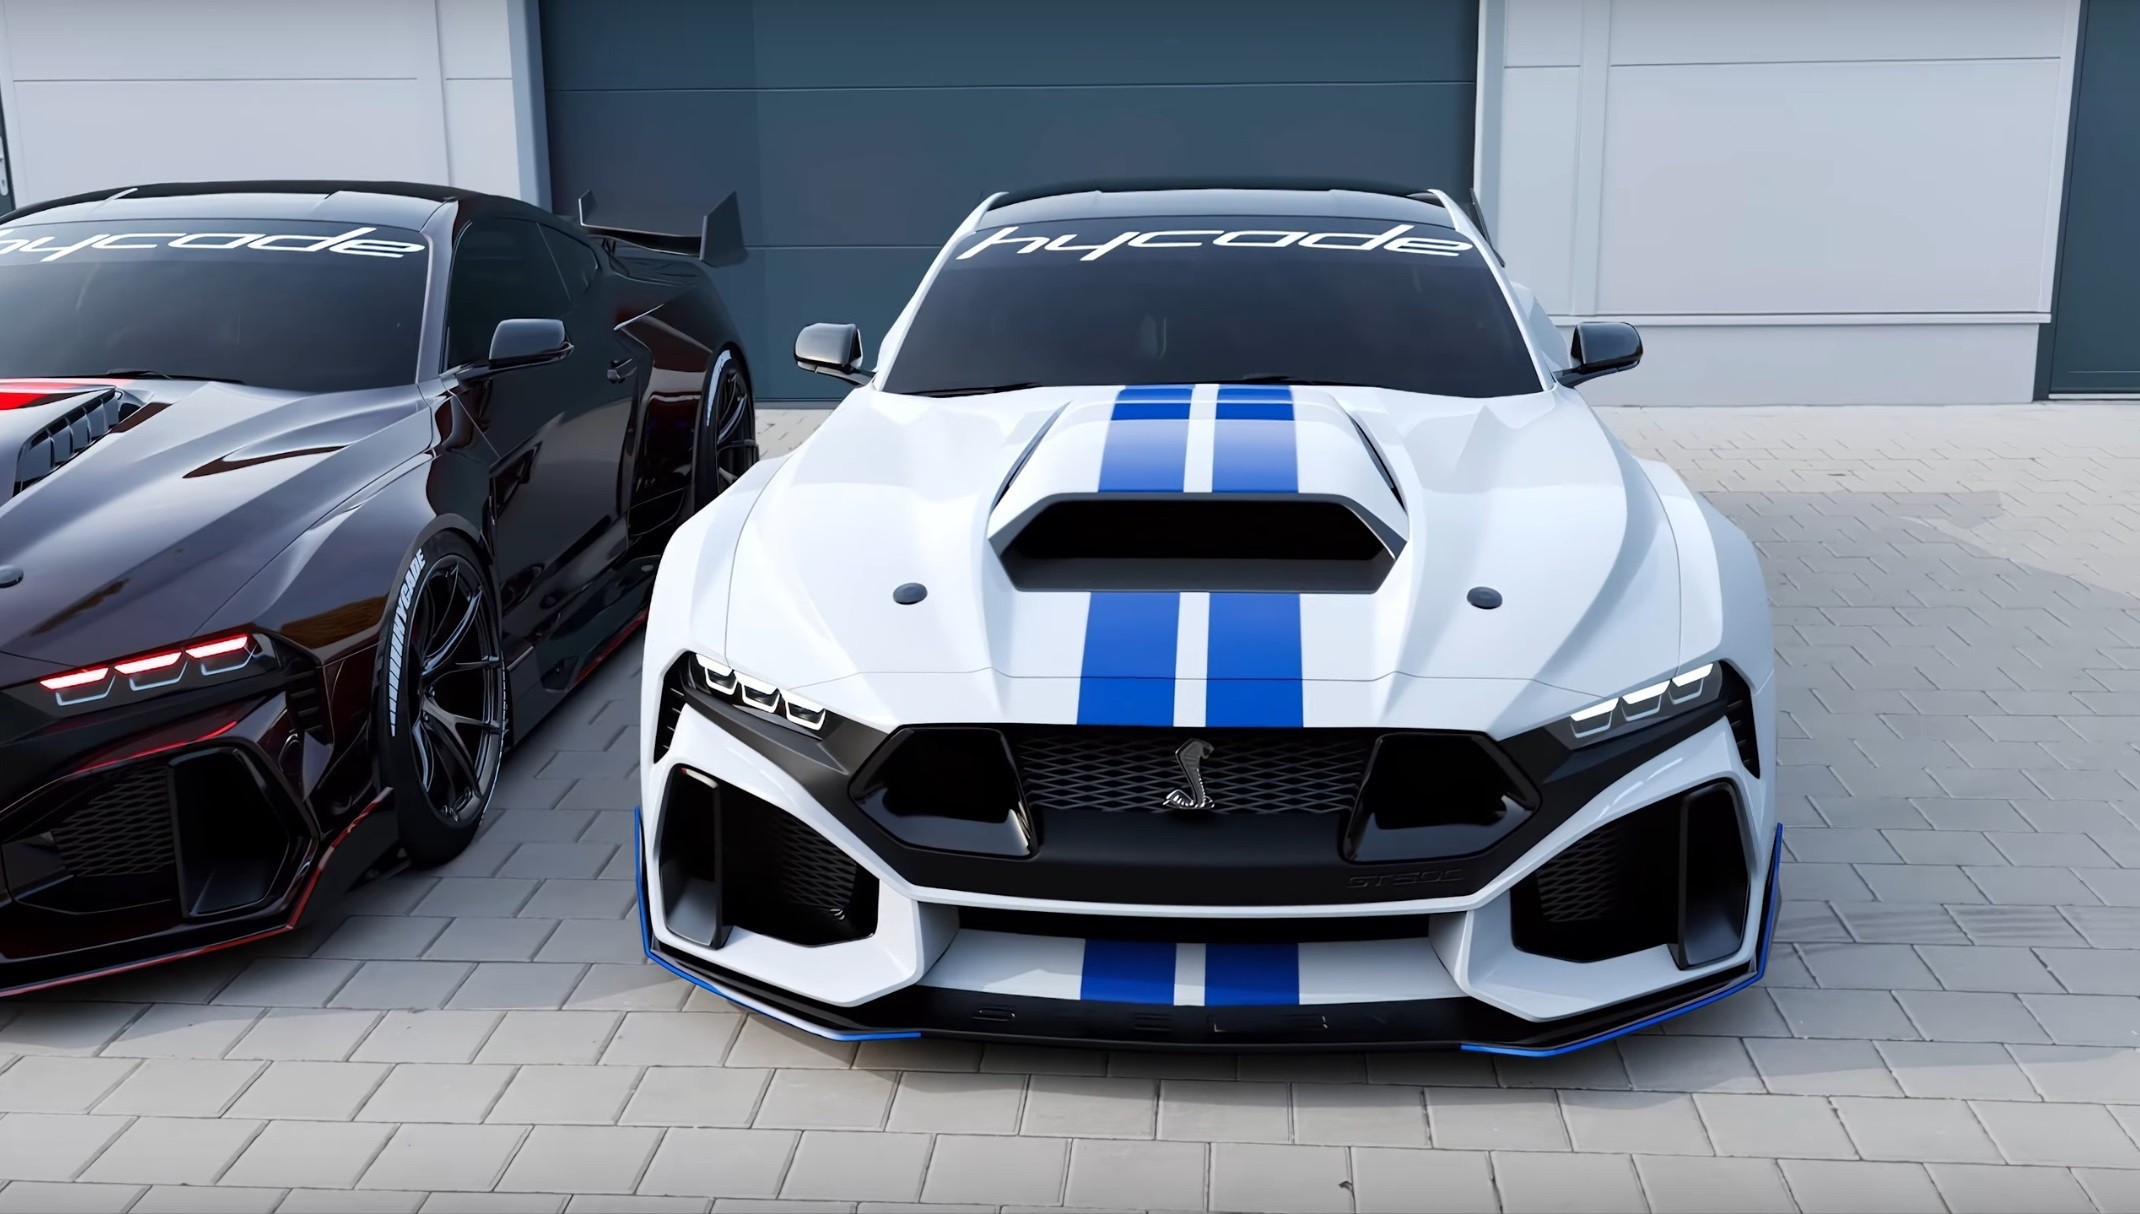 Did This Museum Just Reveal When the New Ford Mustang Shelby GT500 Will